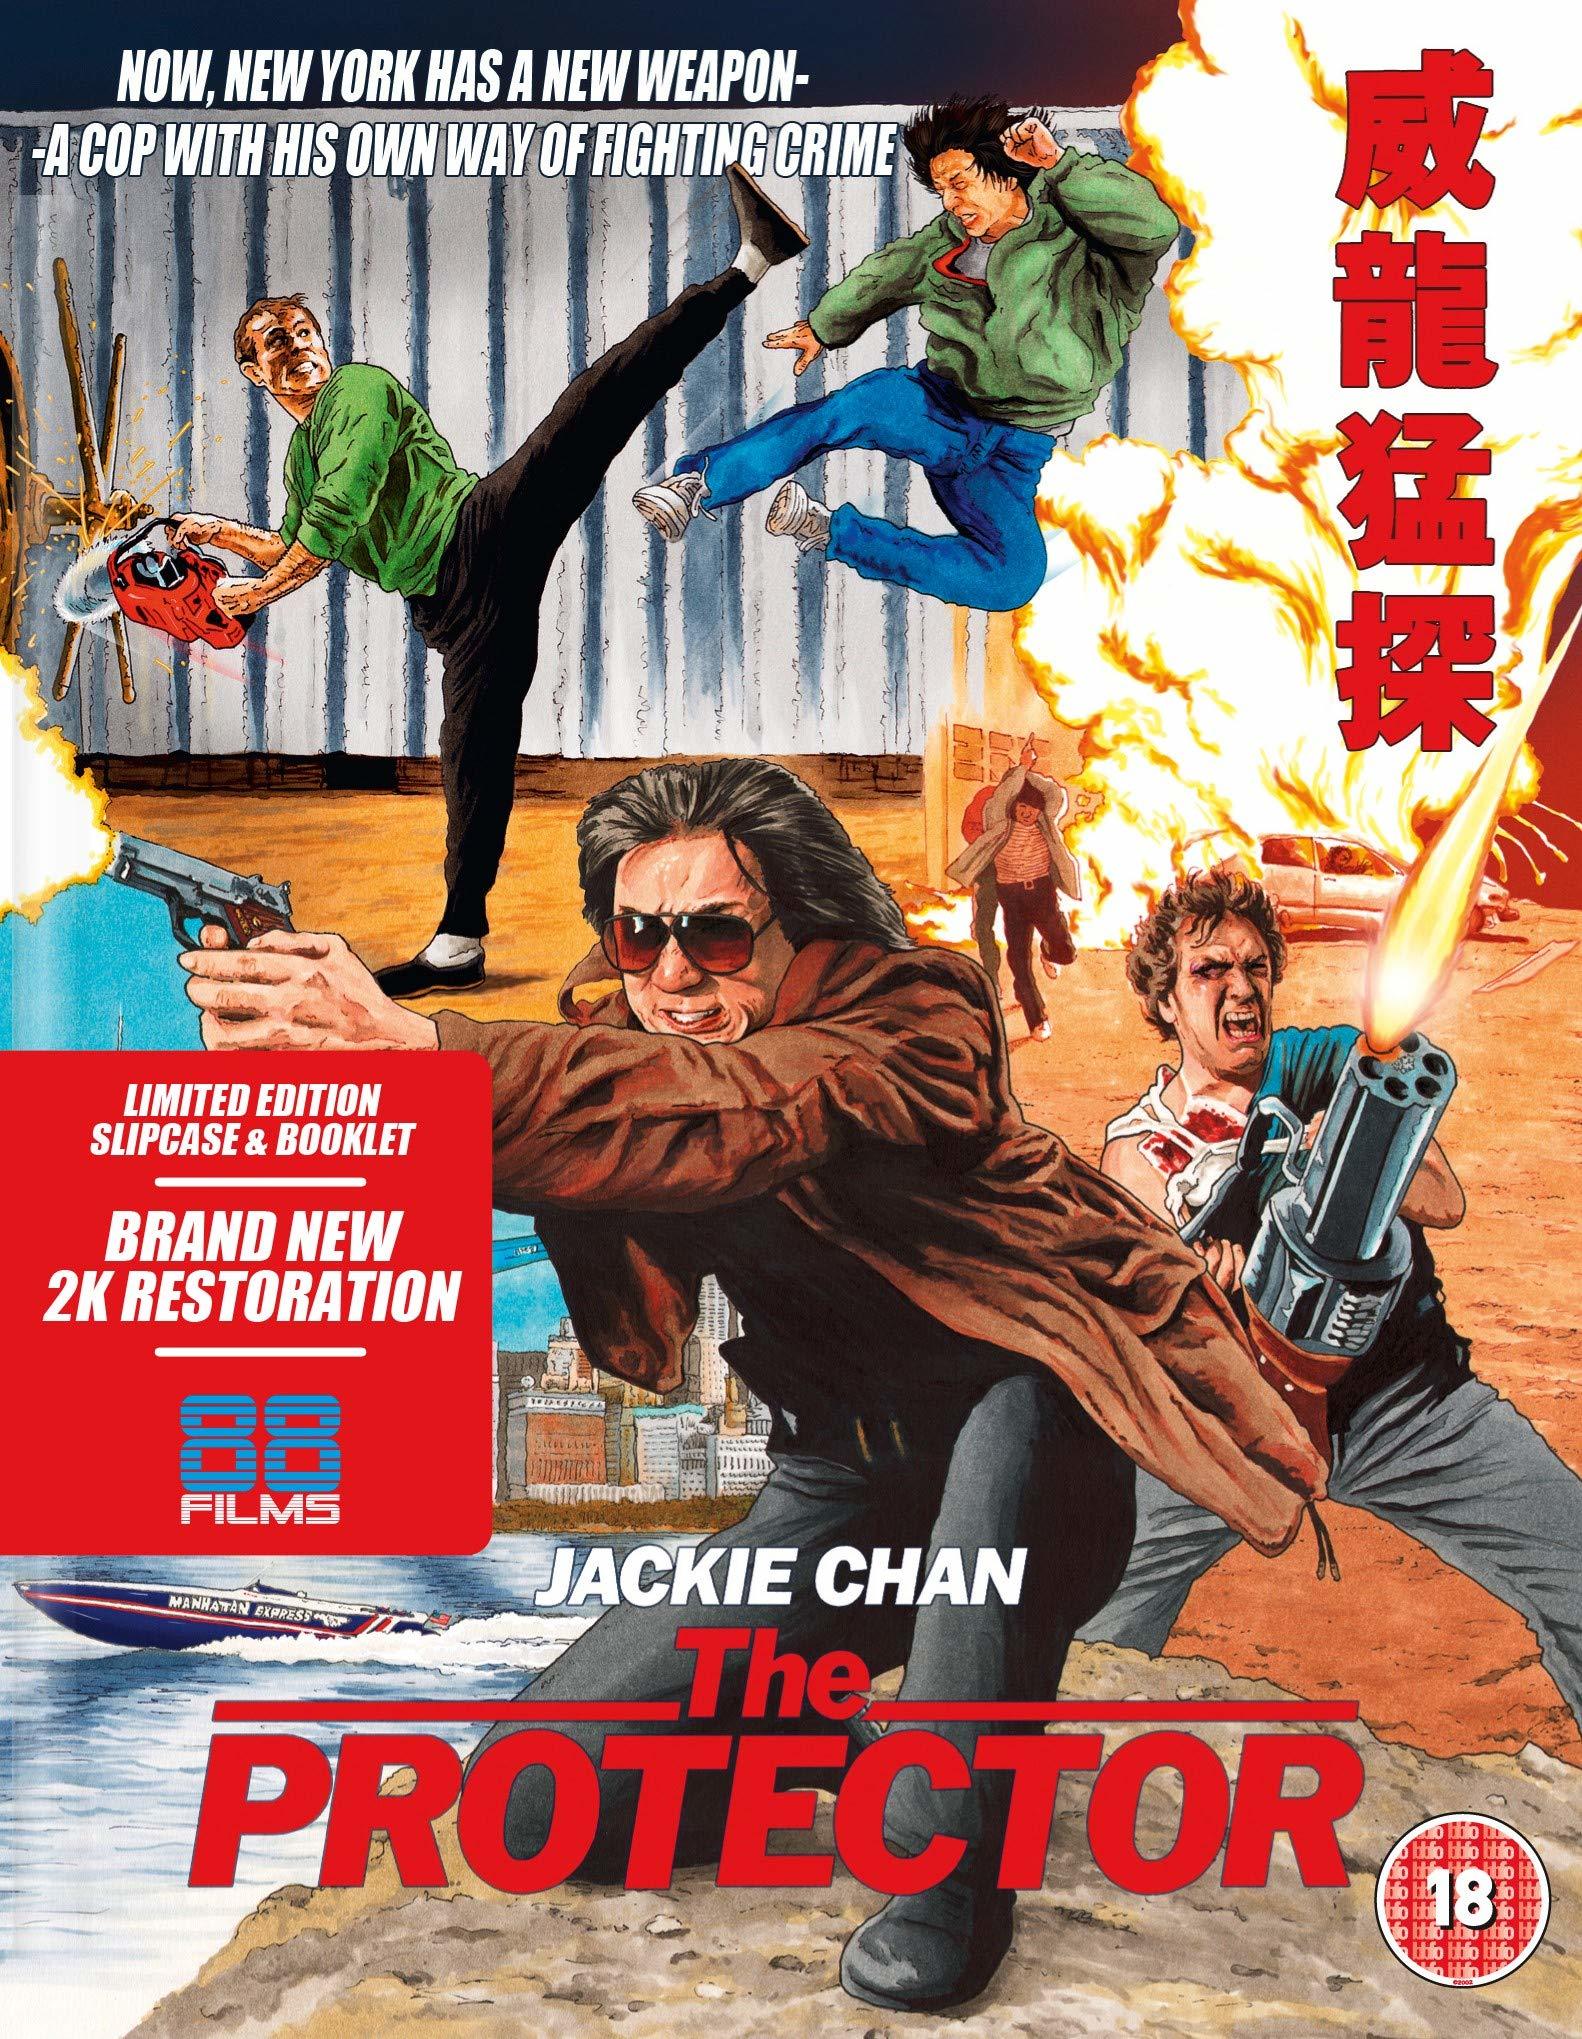 88 Films Four Classic Jackie Chan Films Coming Soon To Blu Ray